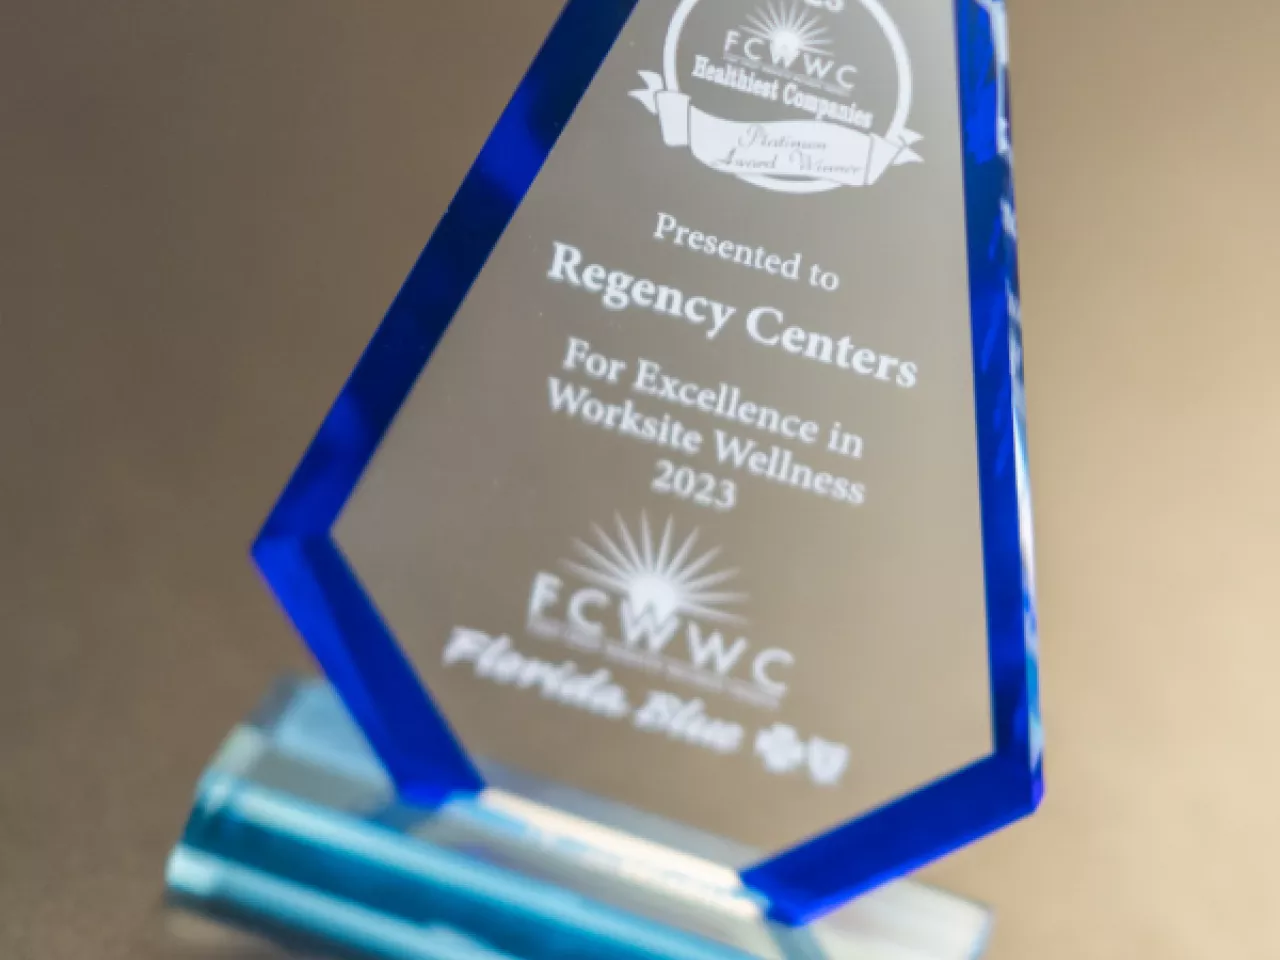 Close up of a FCWWC award "For excellence in workplace wellness."